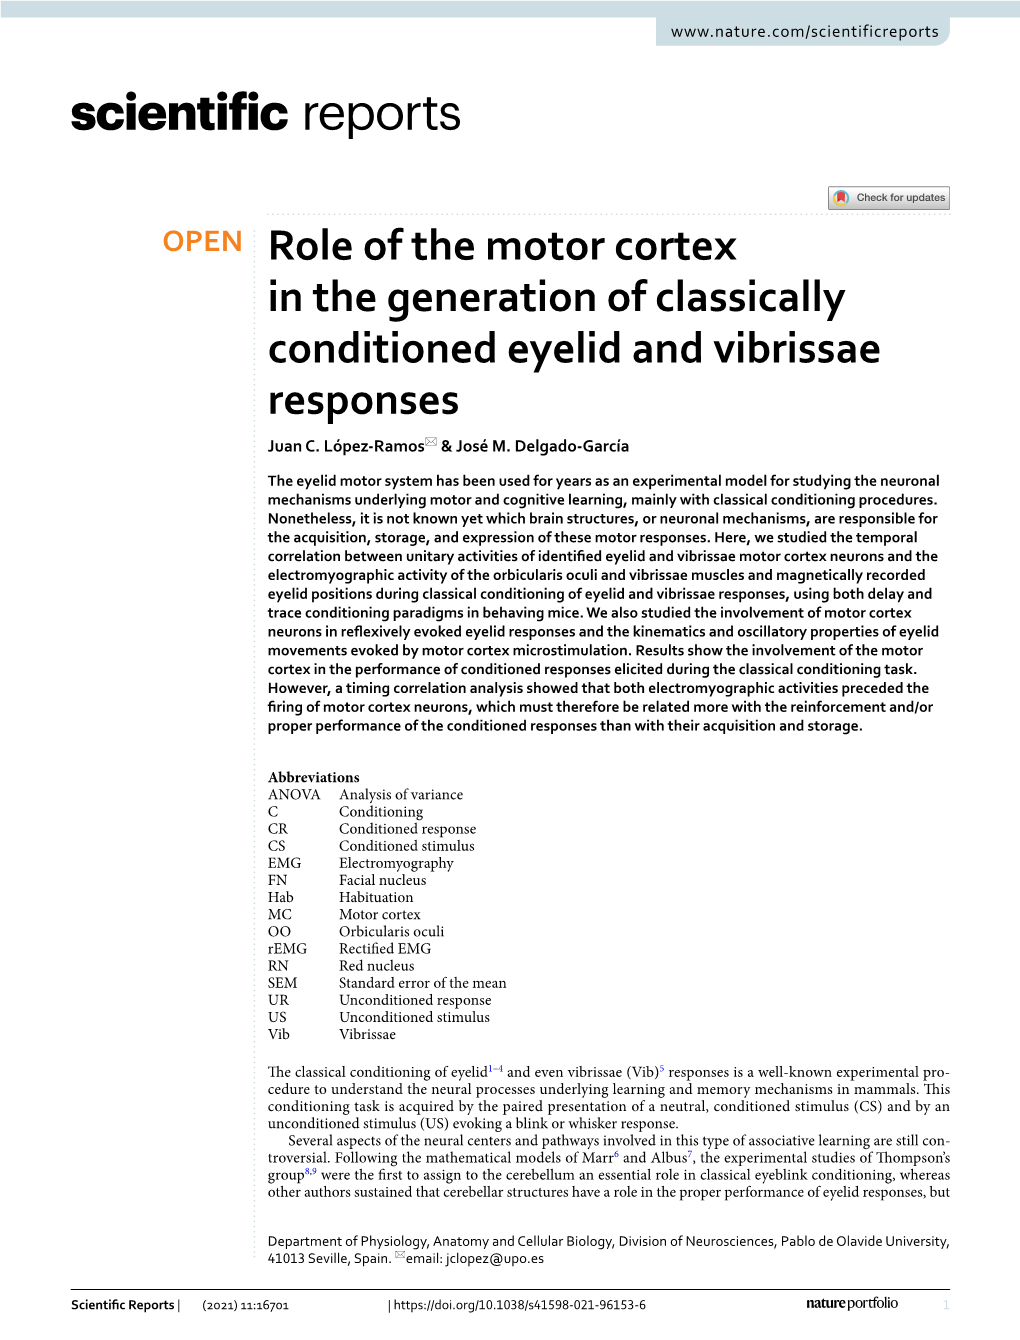 Role of the Motor Cortex in the Generation of Classically Conditioned Eyelid and Vibrissae Responses Juan C